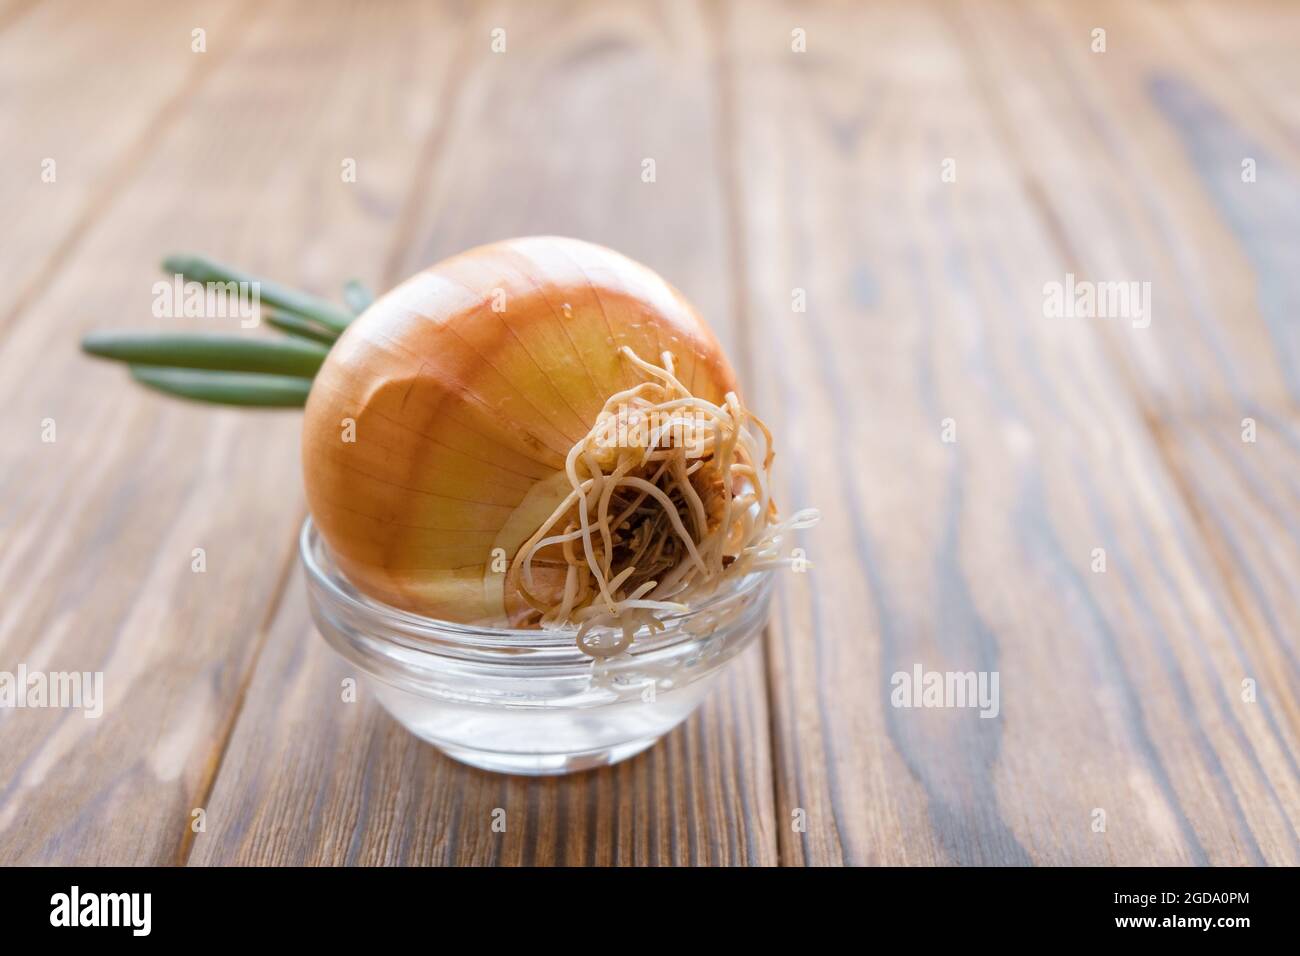 The onion has sprouted. The head lies sideways, white roots are visible. Stock Photo